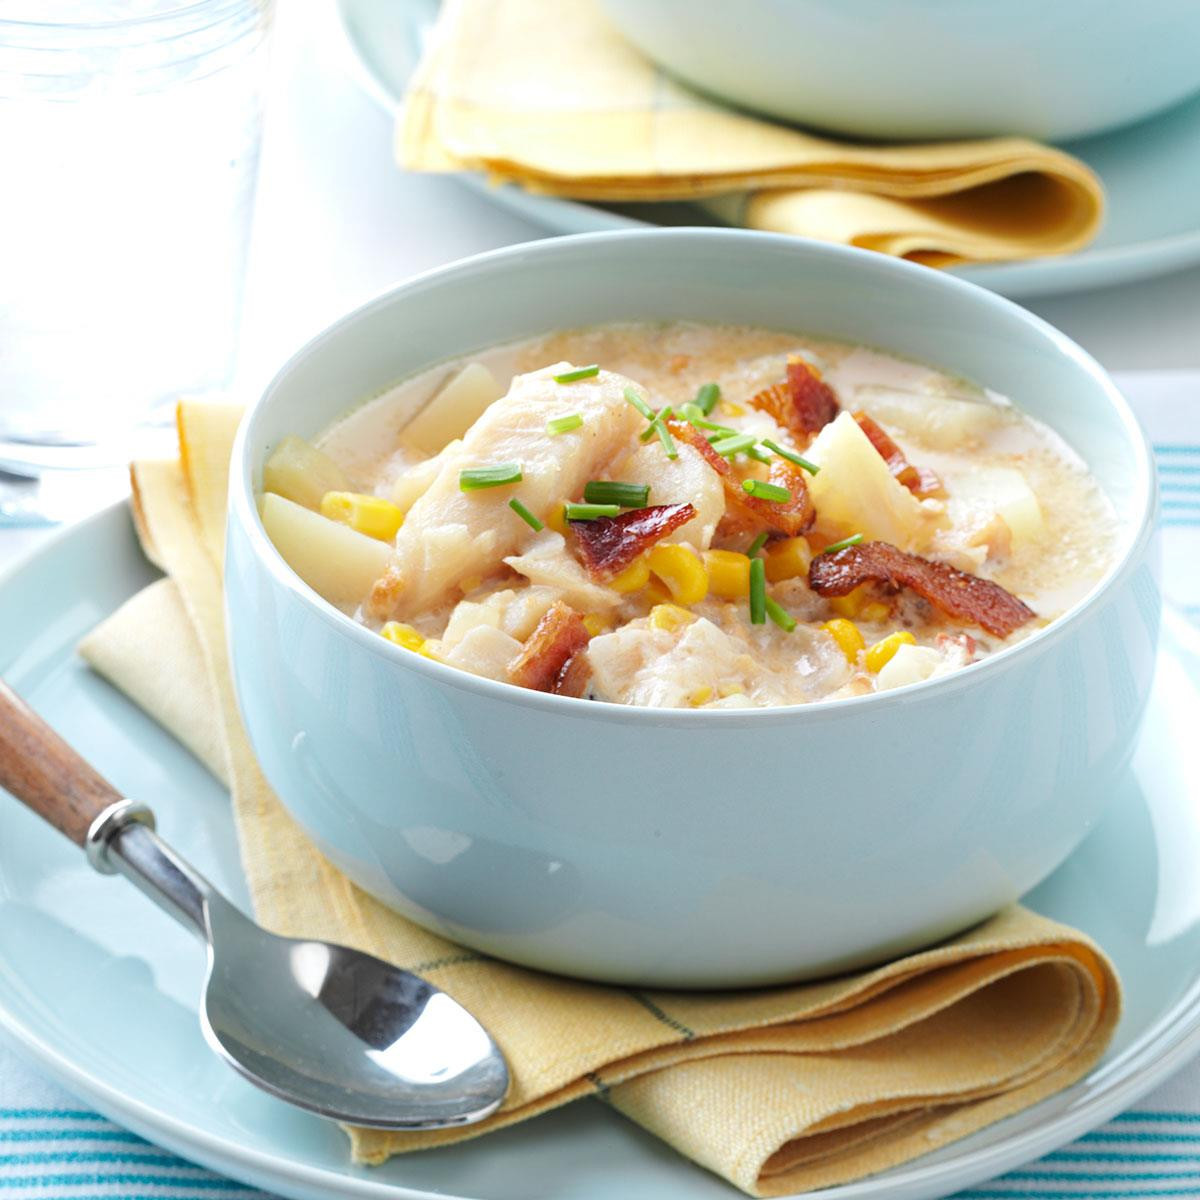 Recipes For Fish Chowder
 Country Fish Chowder Recipe